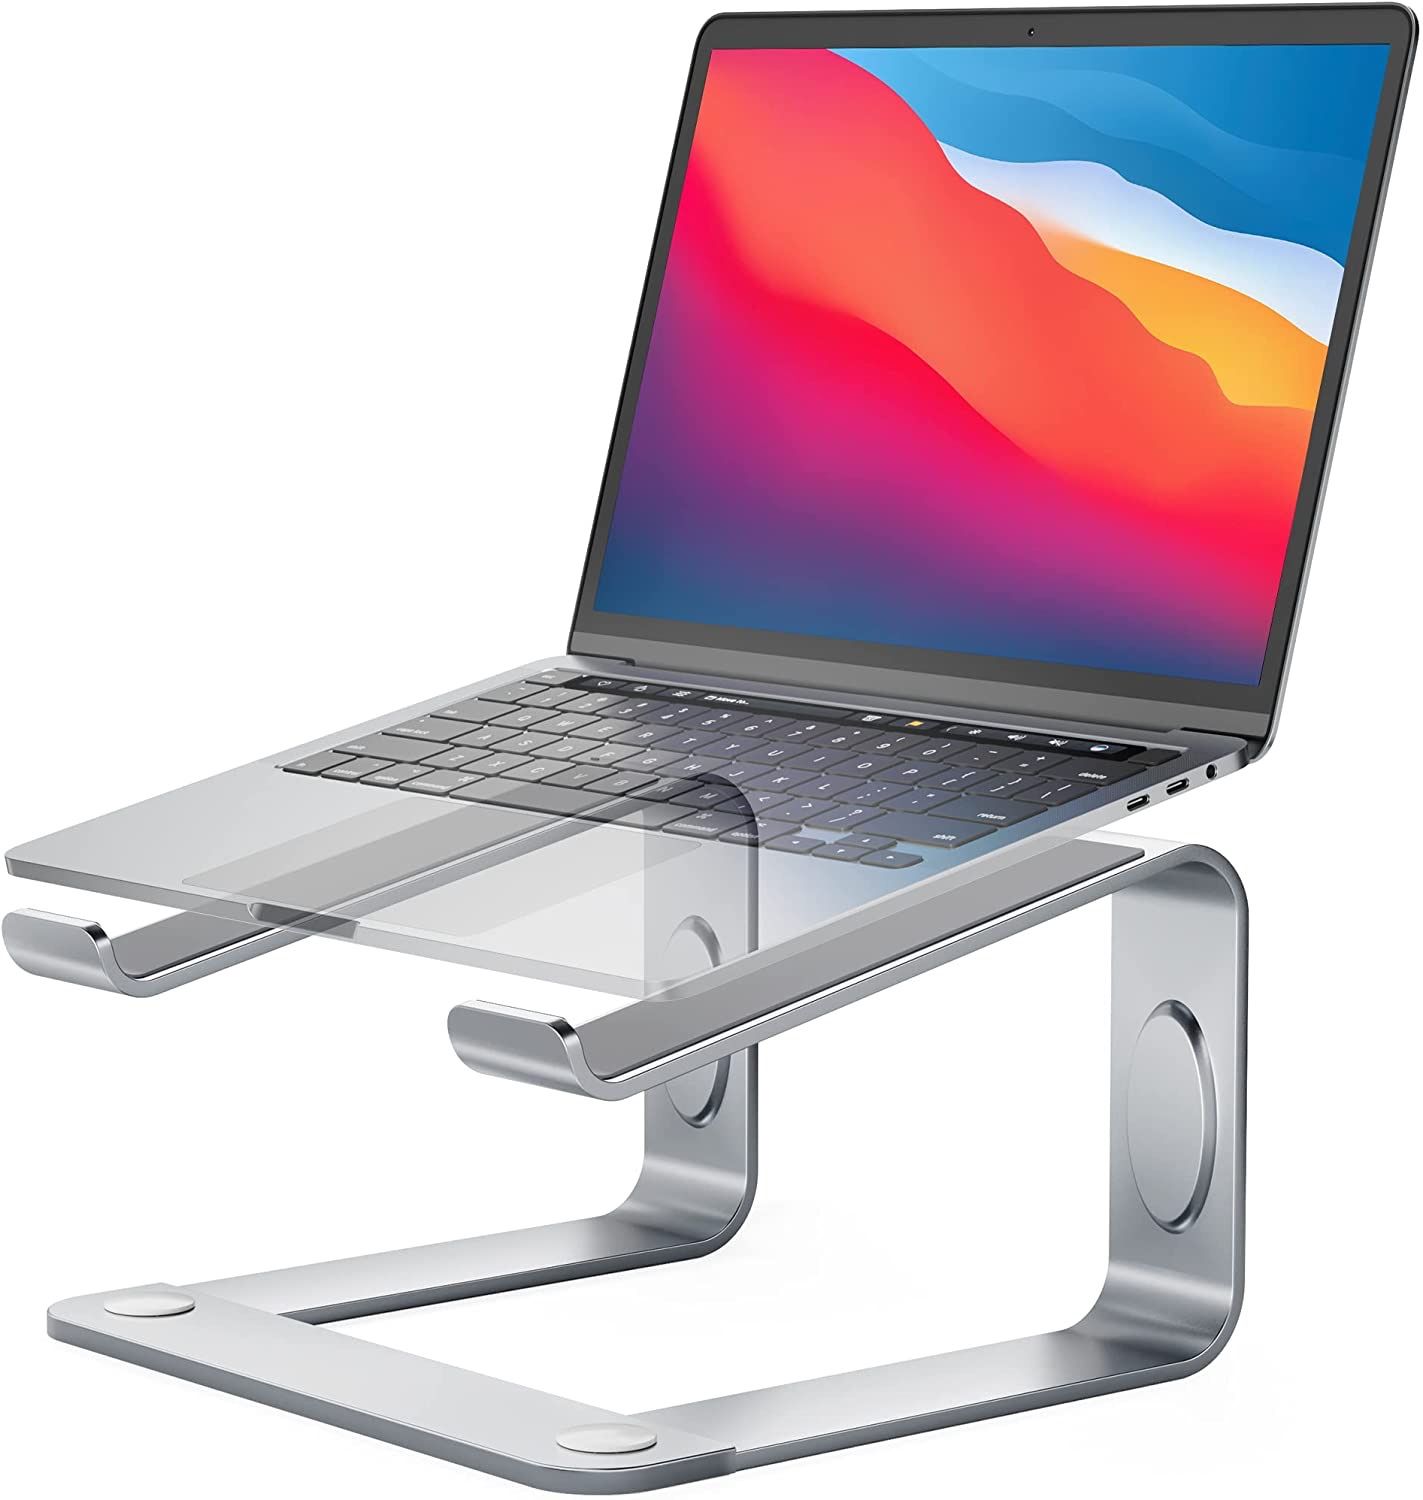 The Loryergo LELSO7 laptop stand with laptop on it